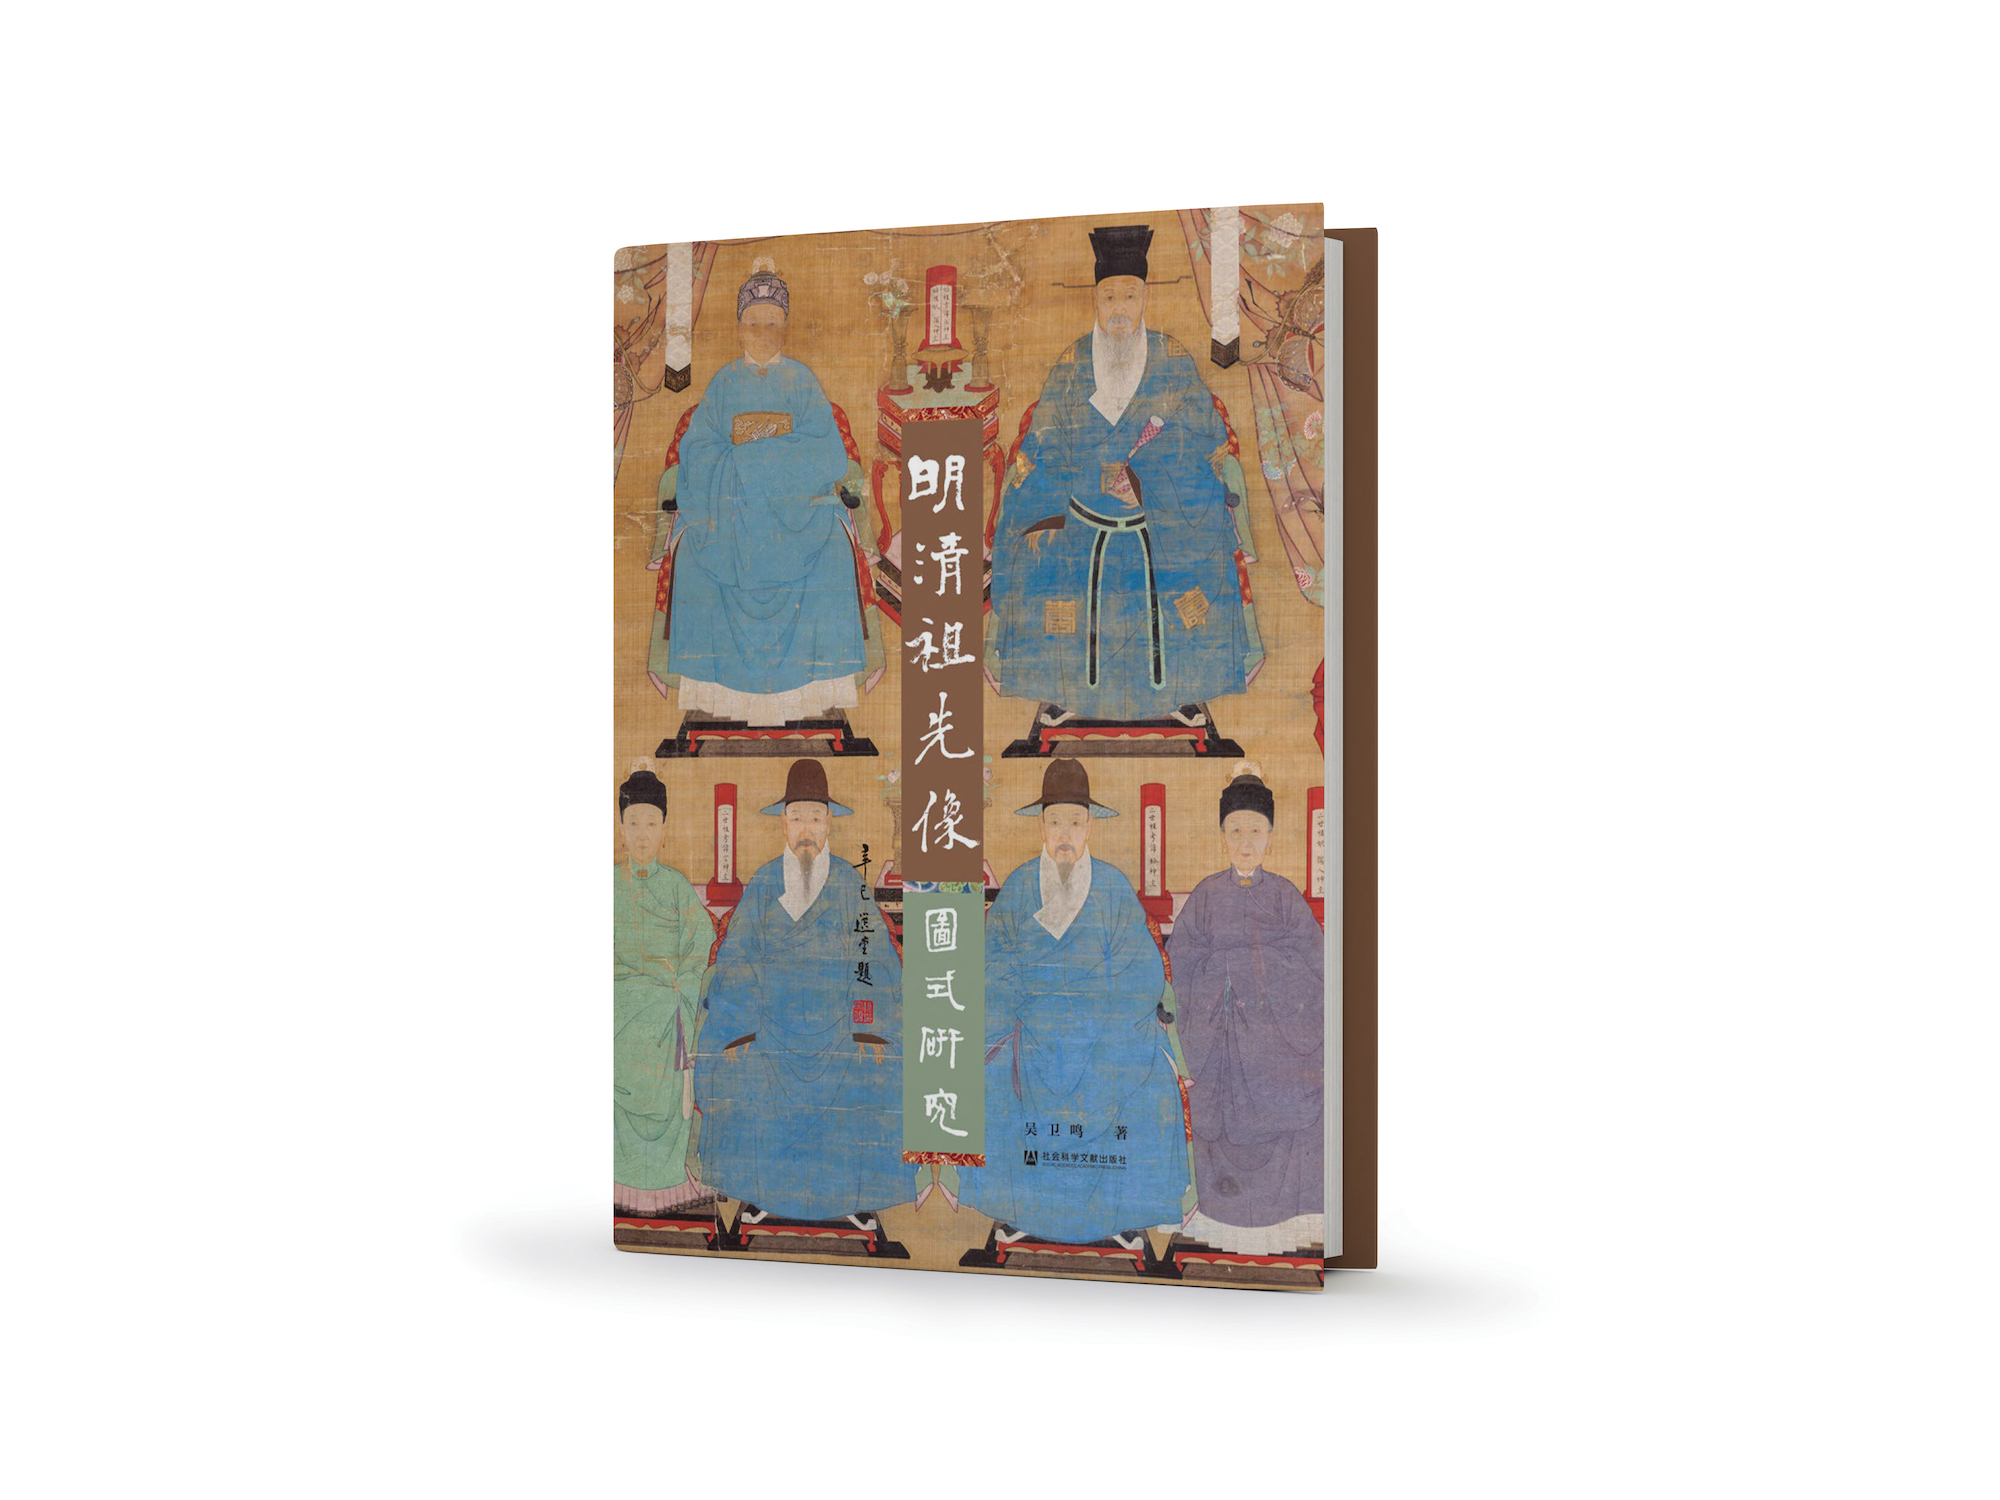 Ancestor Portraits in the Ming and Qing Dynasties